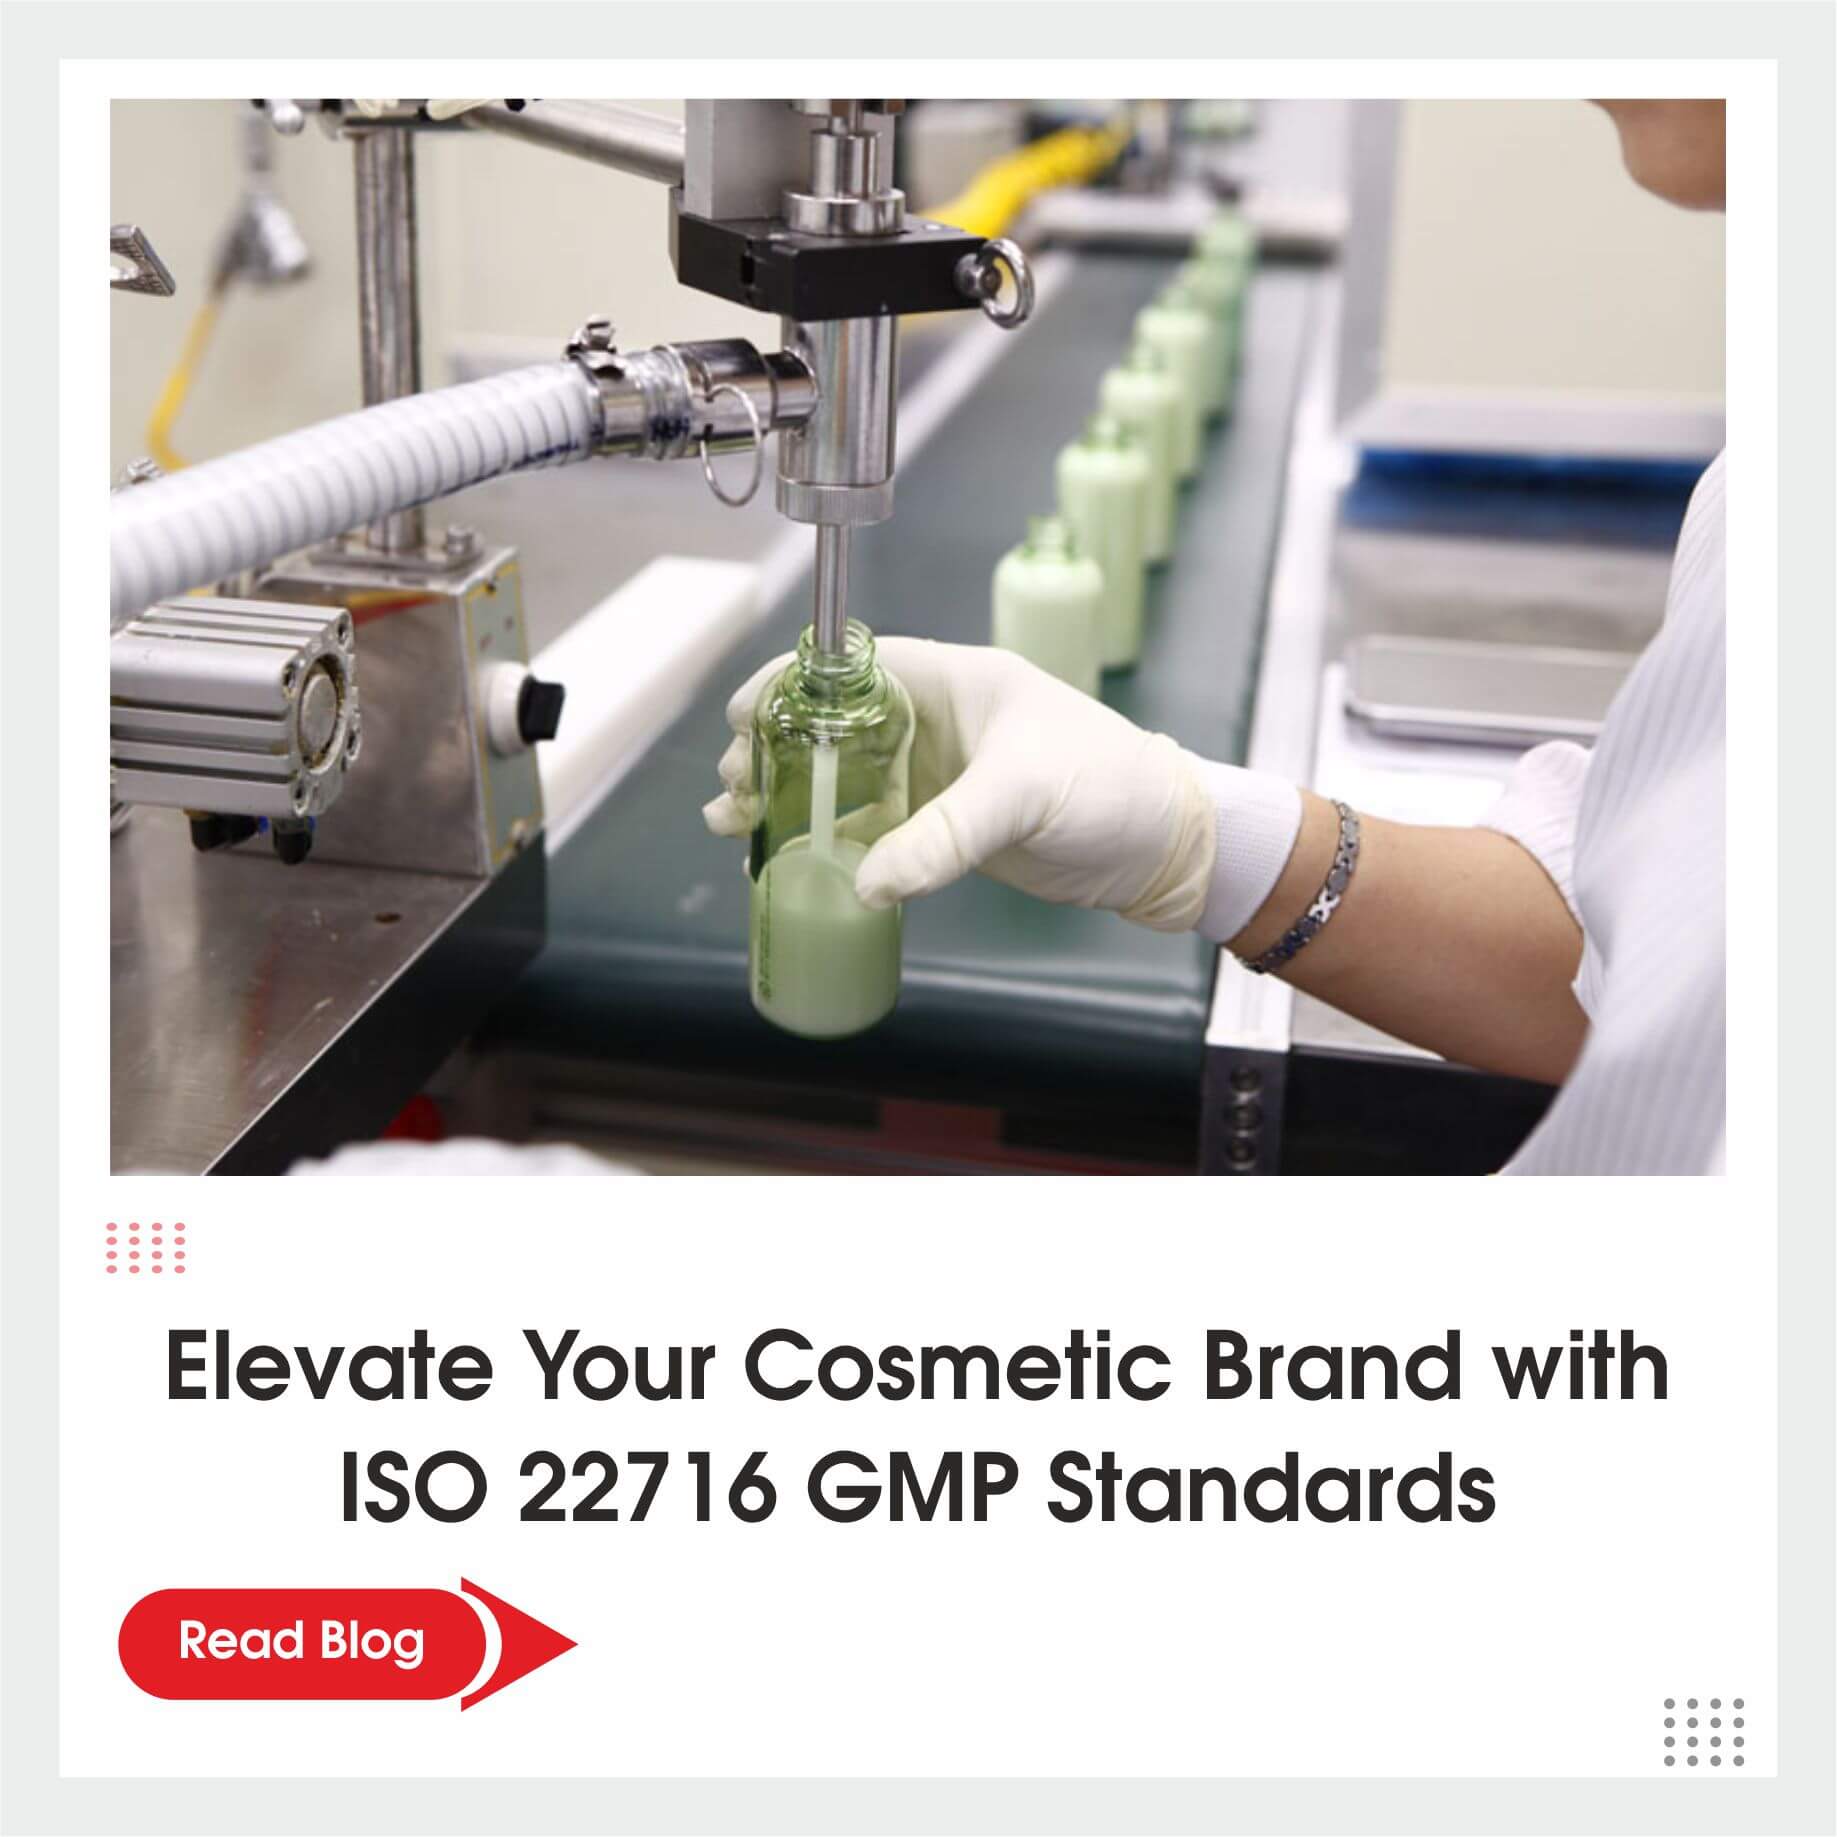 Elevate-Your-Cosmetic-Brand-with-ISO-22716-GMP-Standards